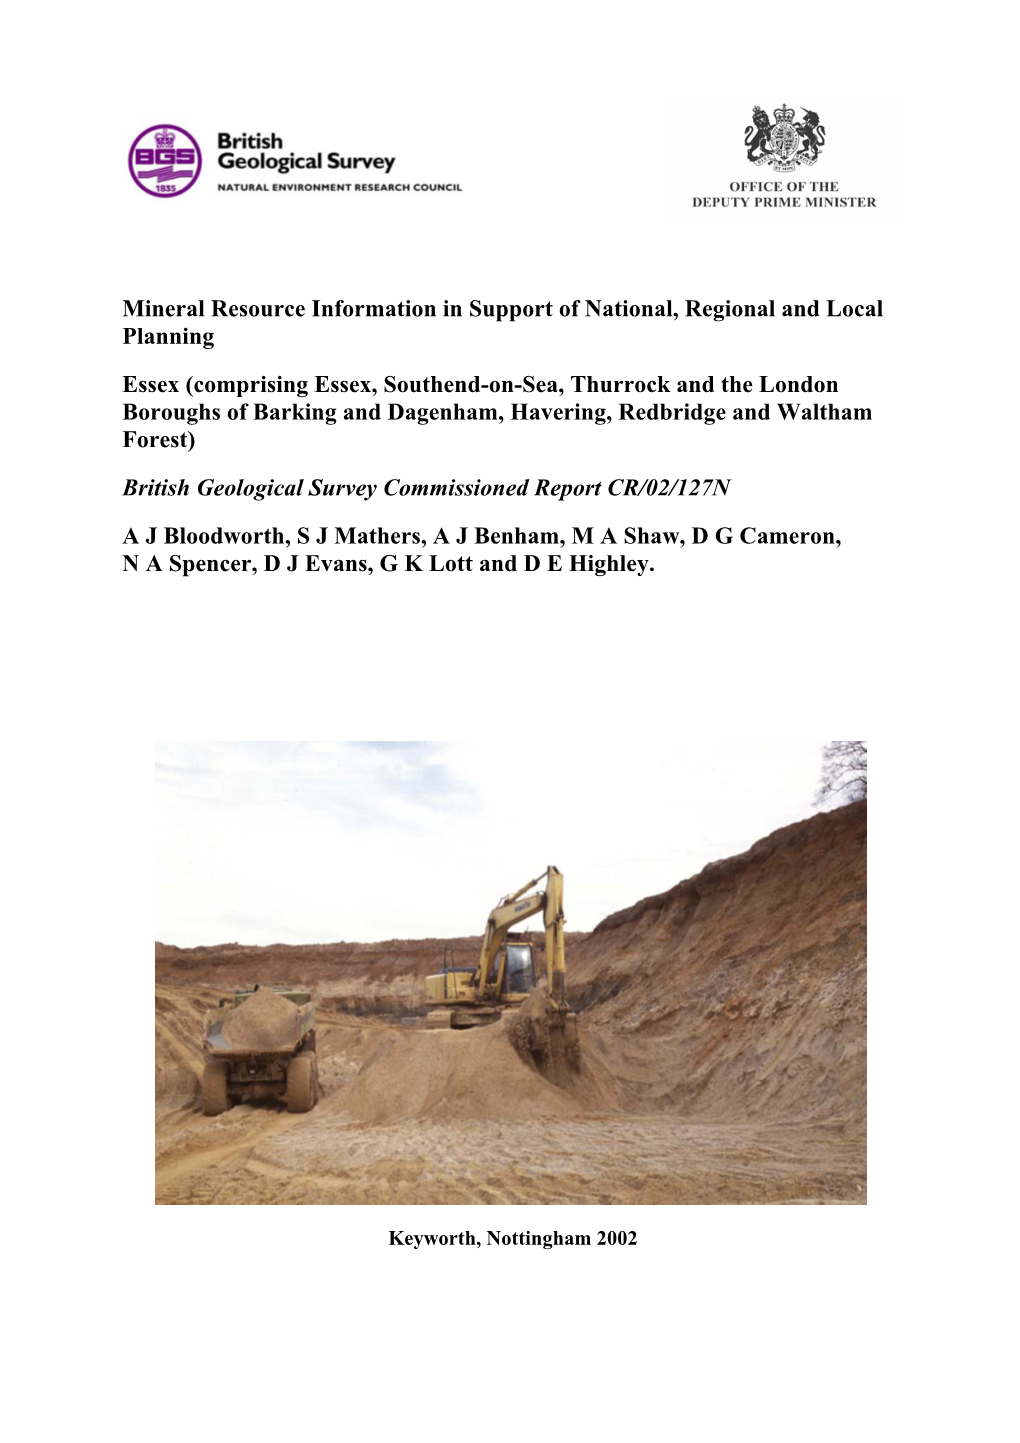 Mineral Resources Report for Essex